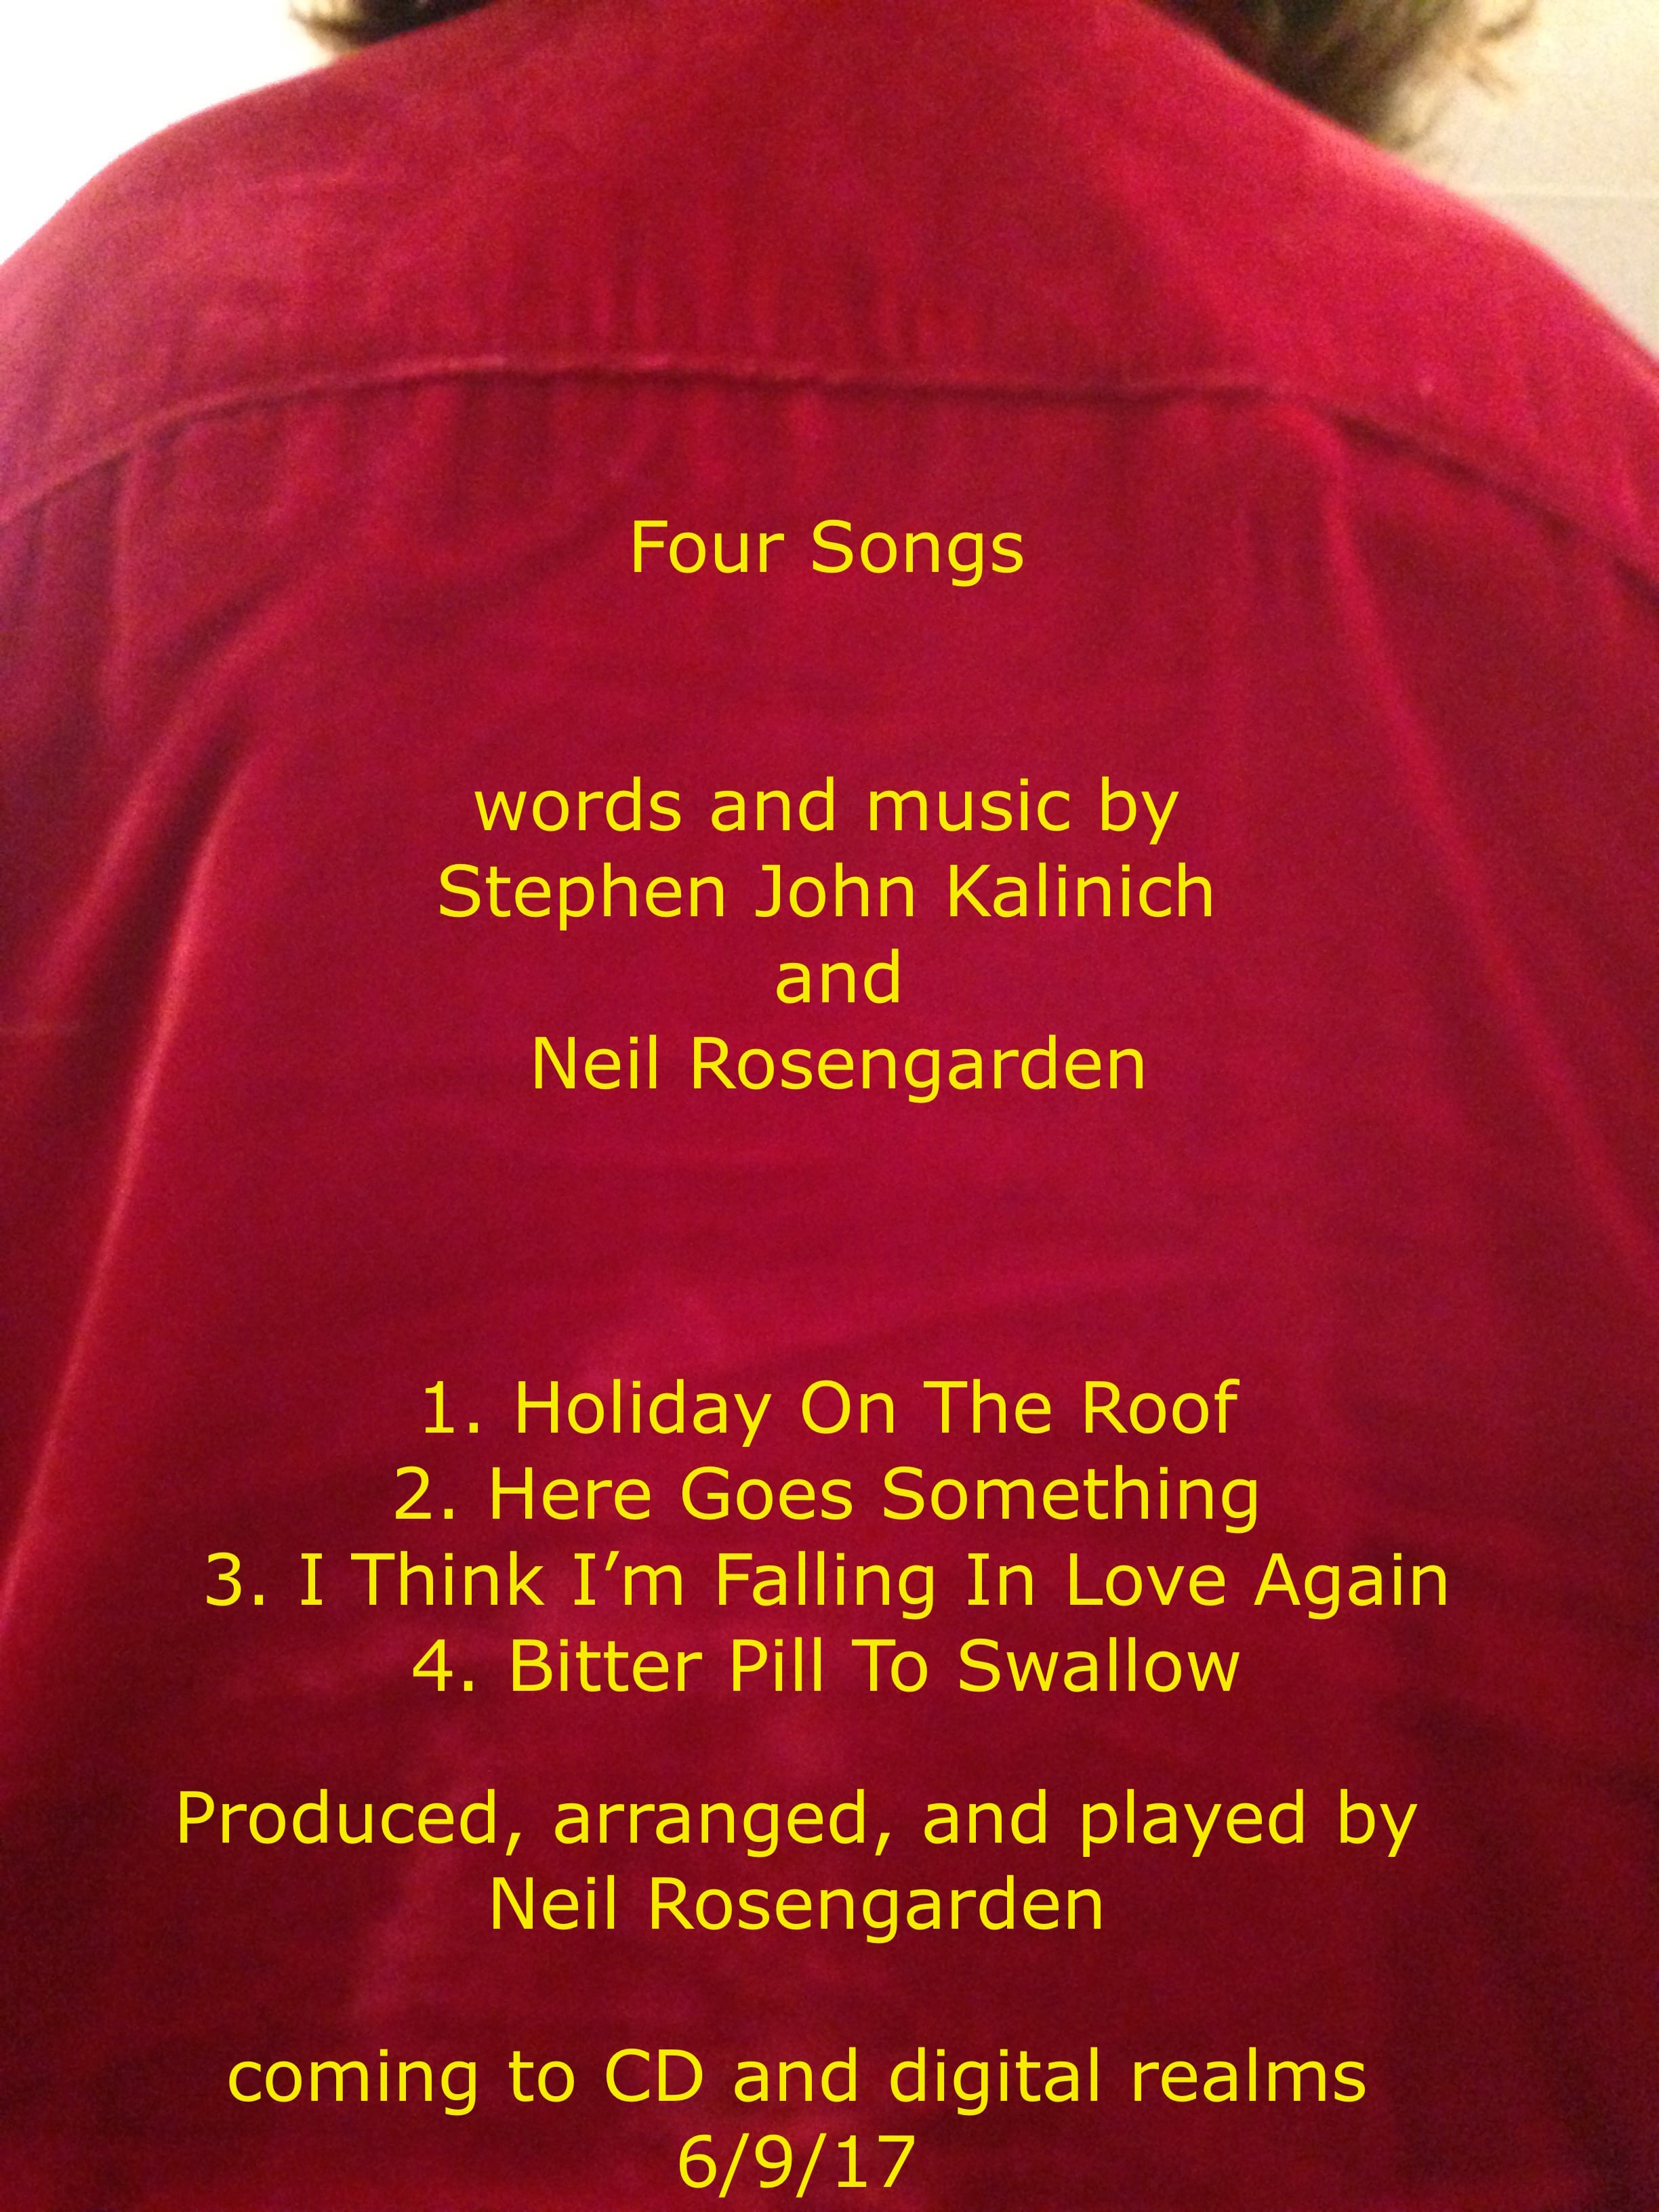 Neil Rosengarden’s  Four Songs Will Nourish Hearts and Minds